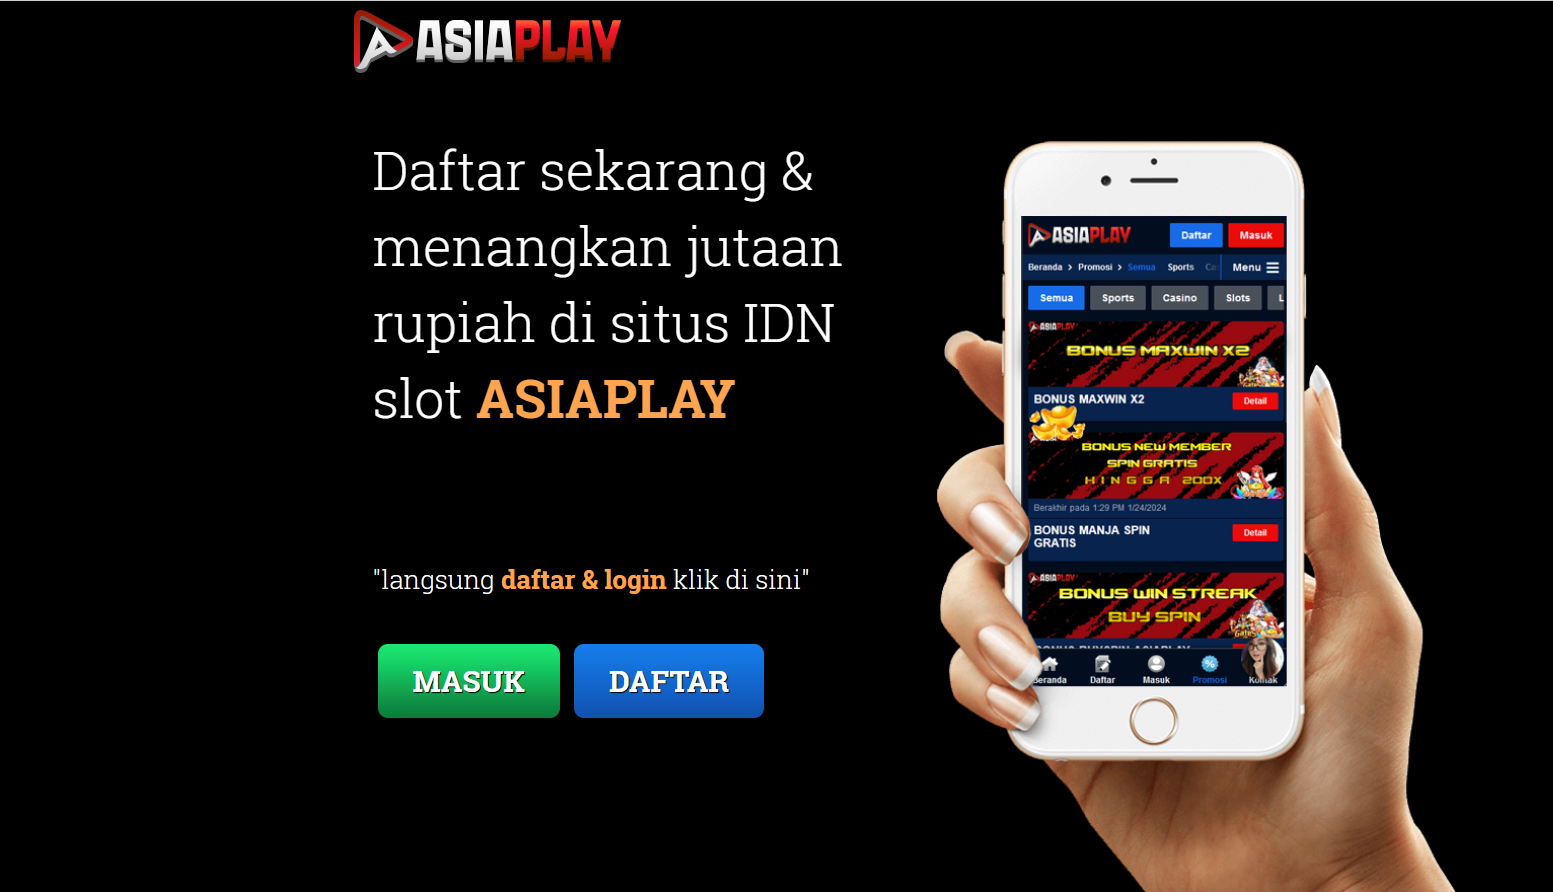 ASIAPLAY